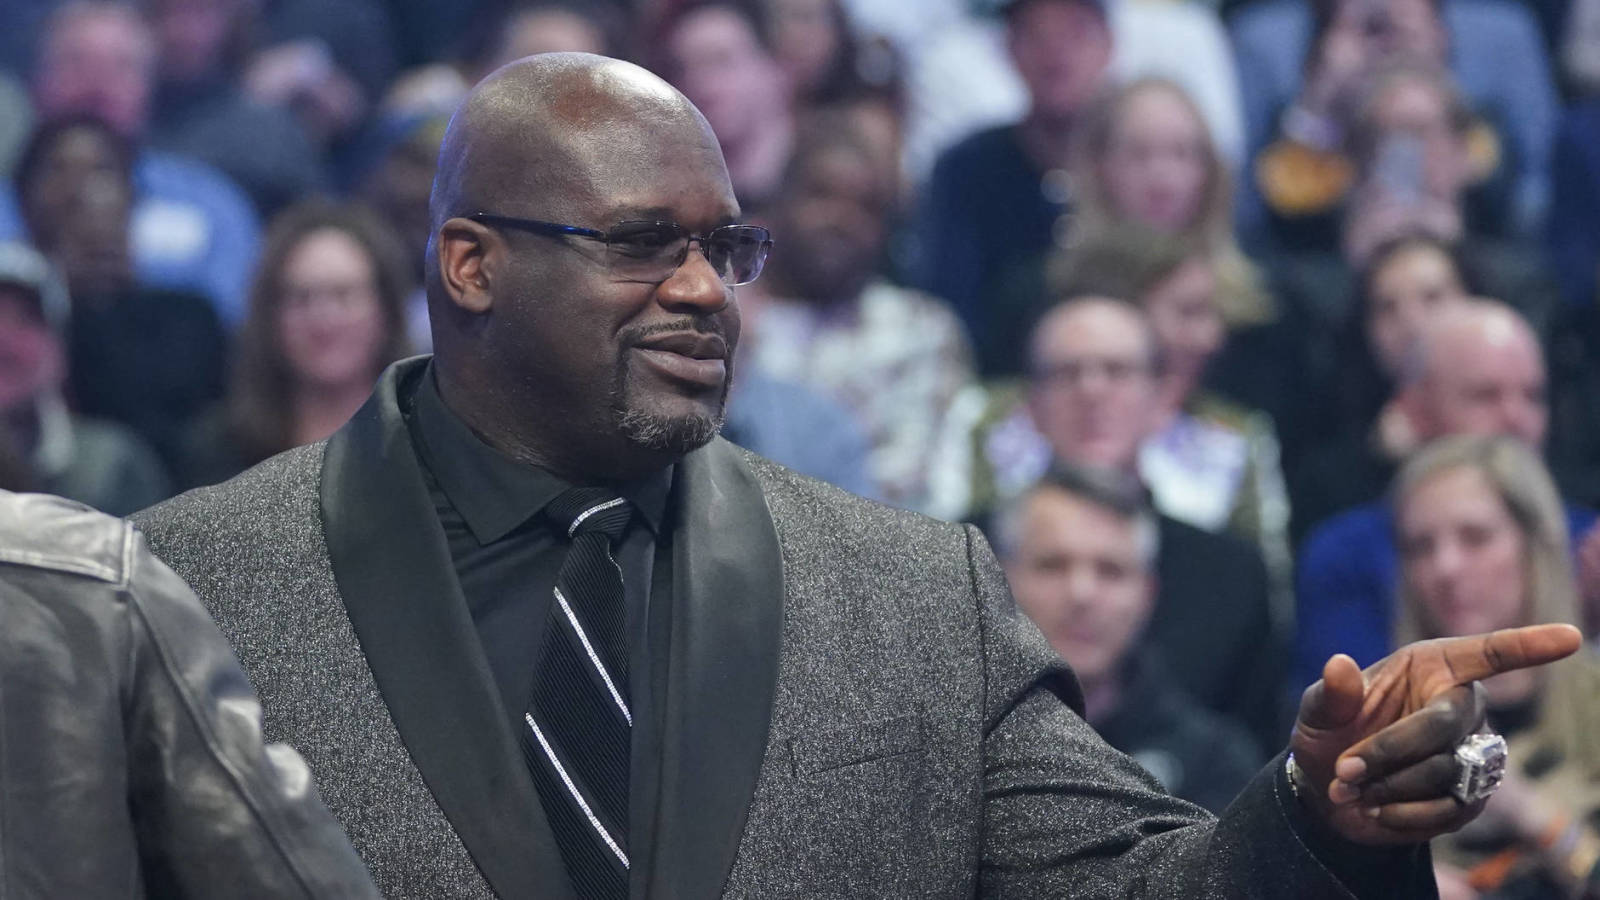 LISTEN: Why Did Shaquille O'Neal Leave The Orlando Magic and Join